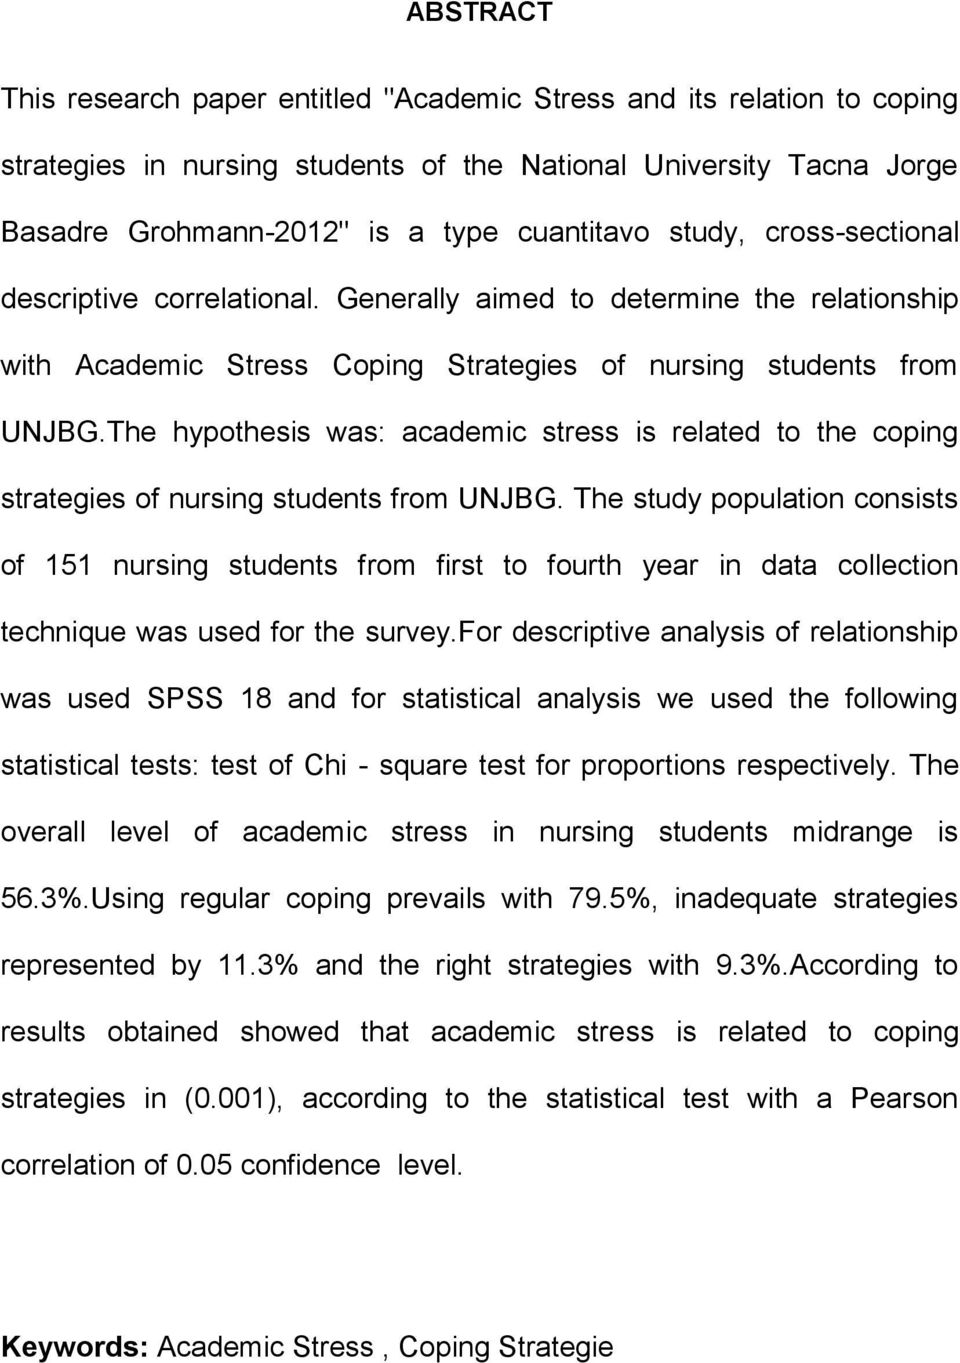 The hypothesis was: academic stress is related to the coping strategies of nursing students from UNJBG.